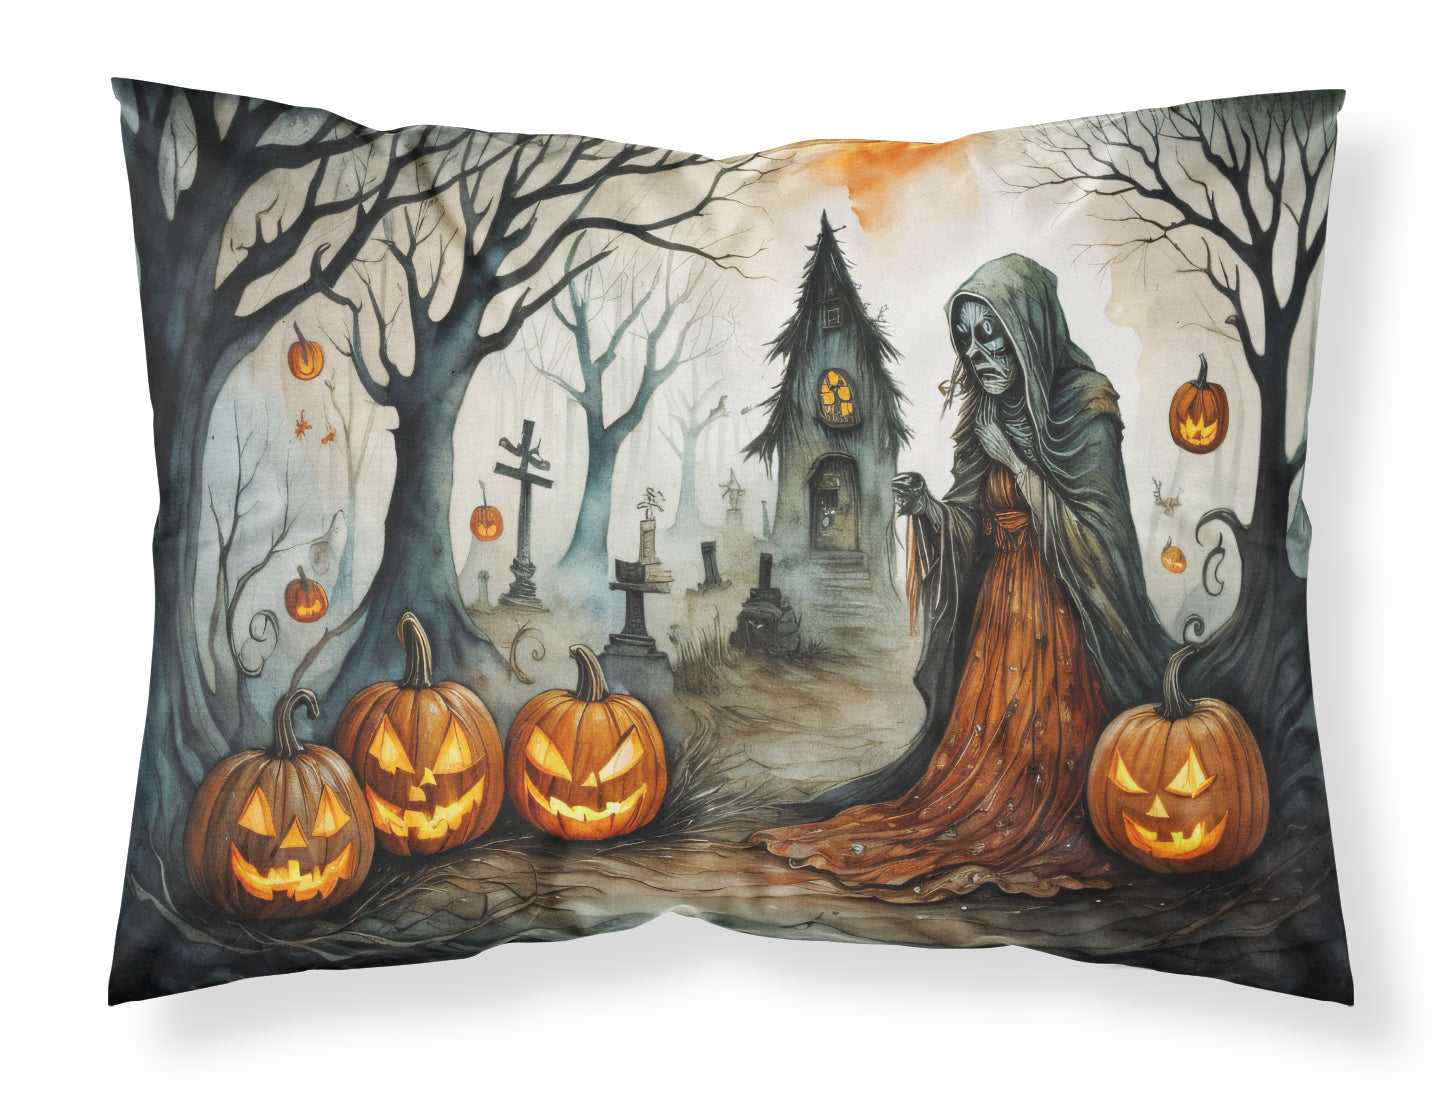 Buy this The Weeping Woman Spooky Halloween Fabric Standard Pillowcase